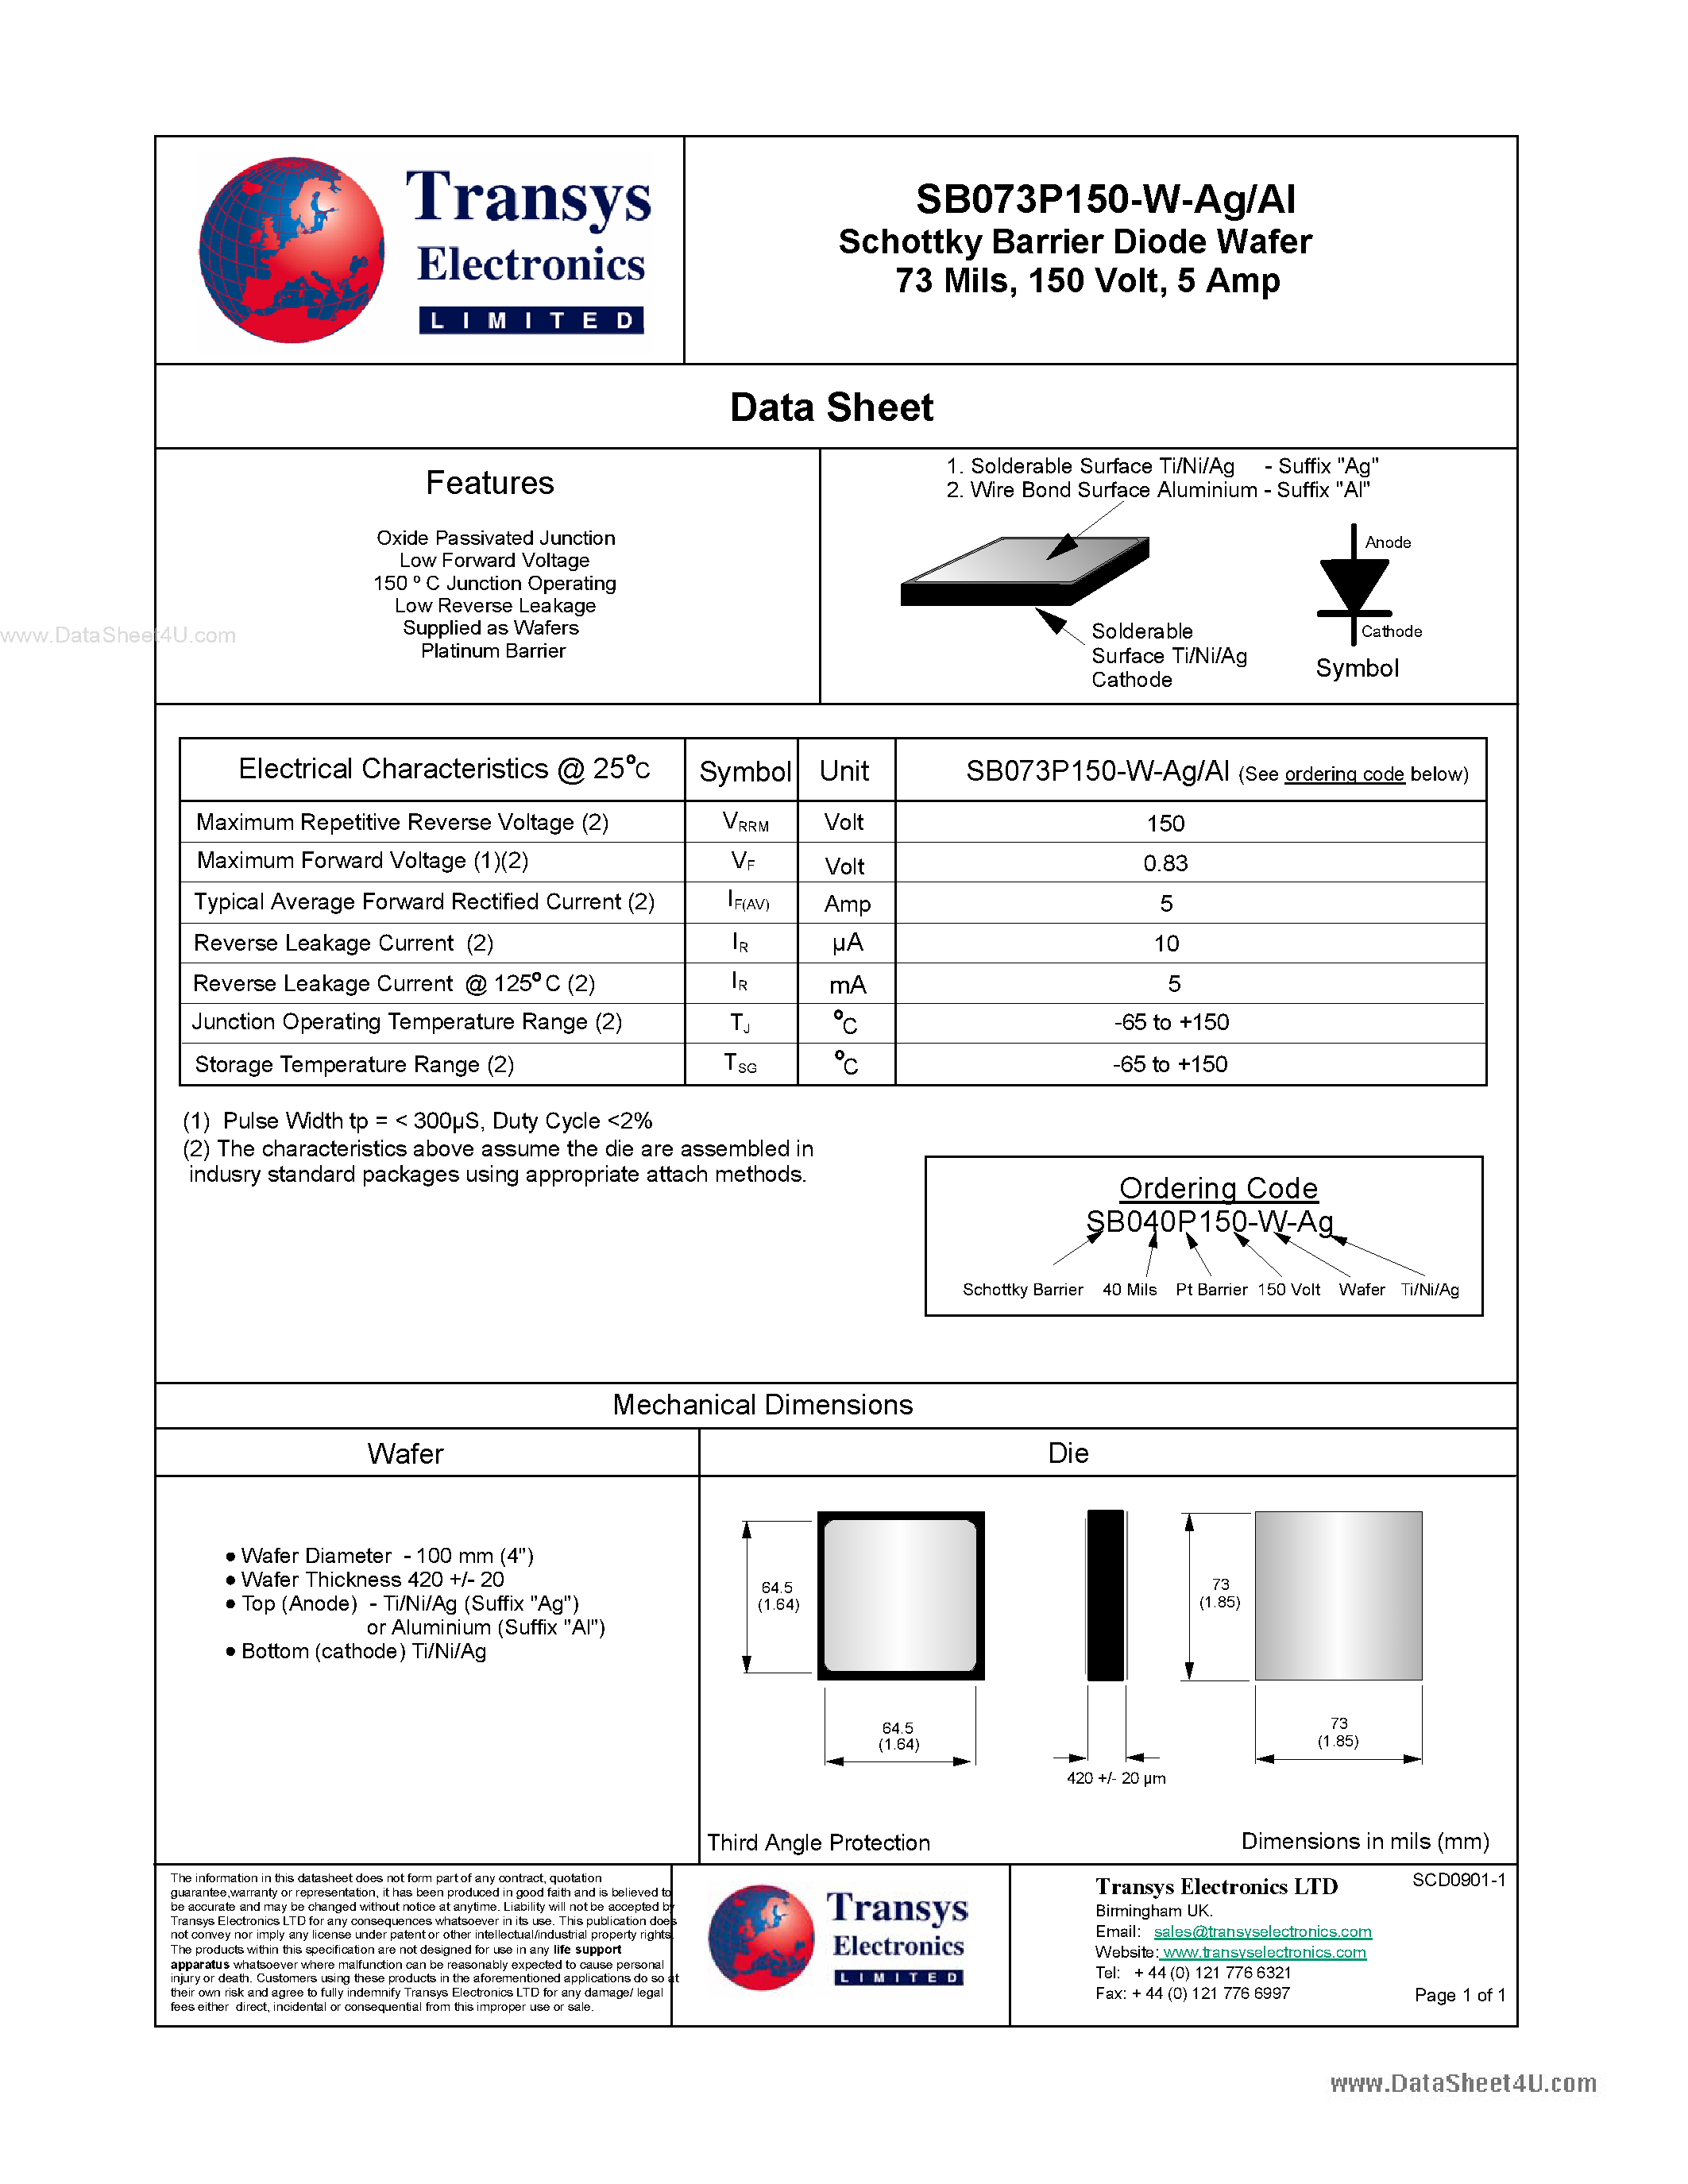 Datasheet SB073P150-W-AG - Schottky Barrier Diode Wafer page 1